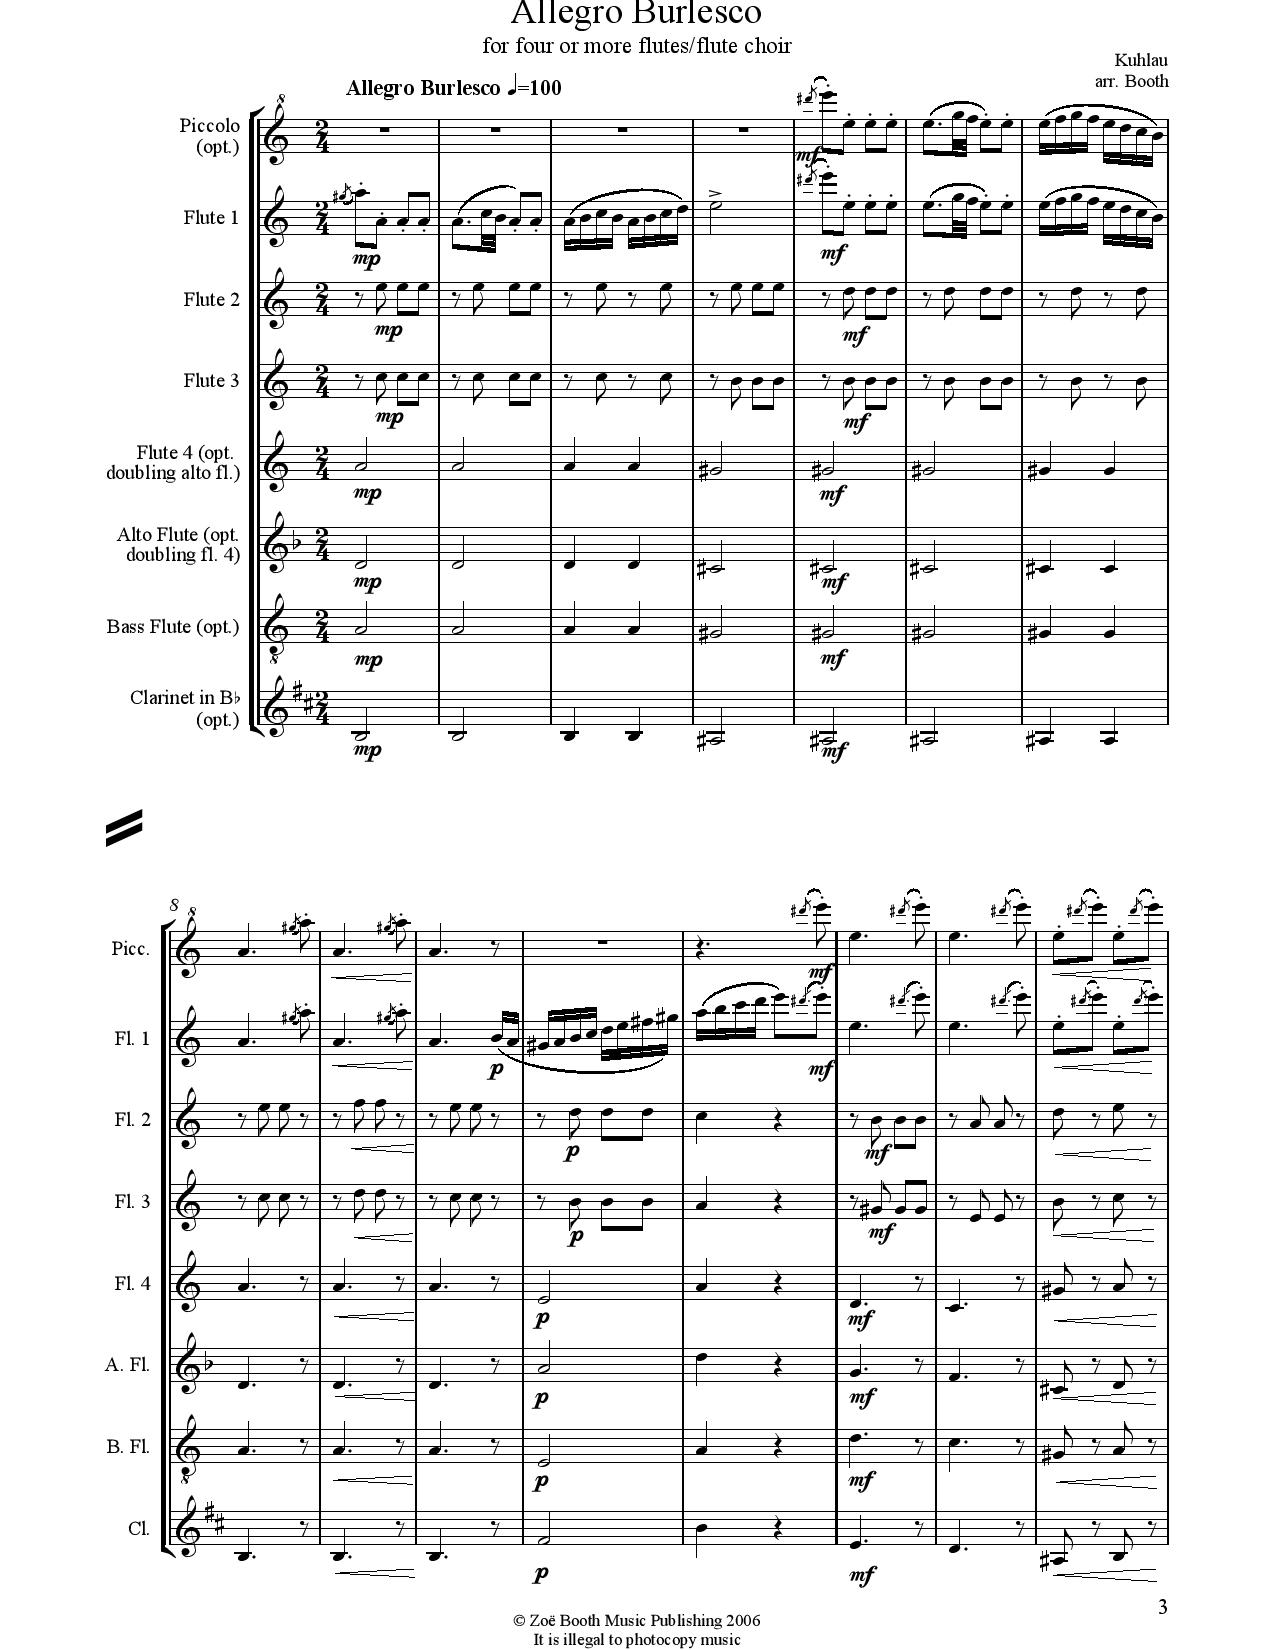 Allegro Burlesco by Kuhlau,  arranged by Zoë Booth for four or more flutes/flute choir